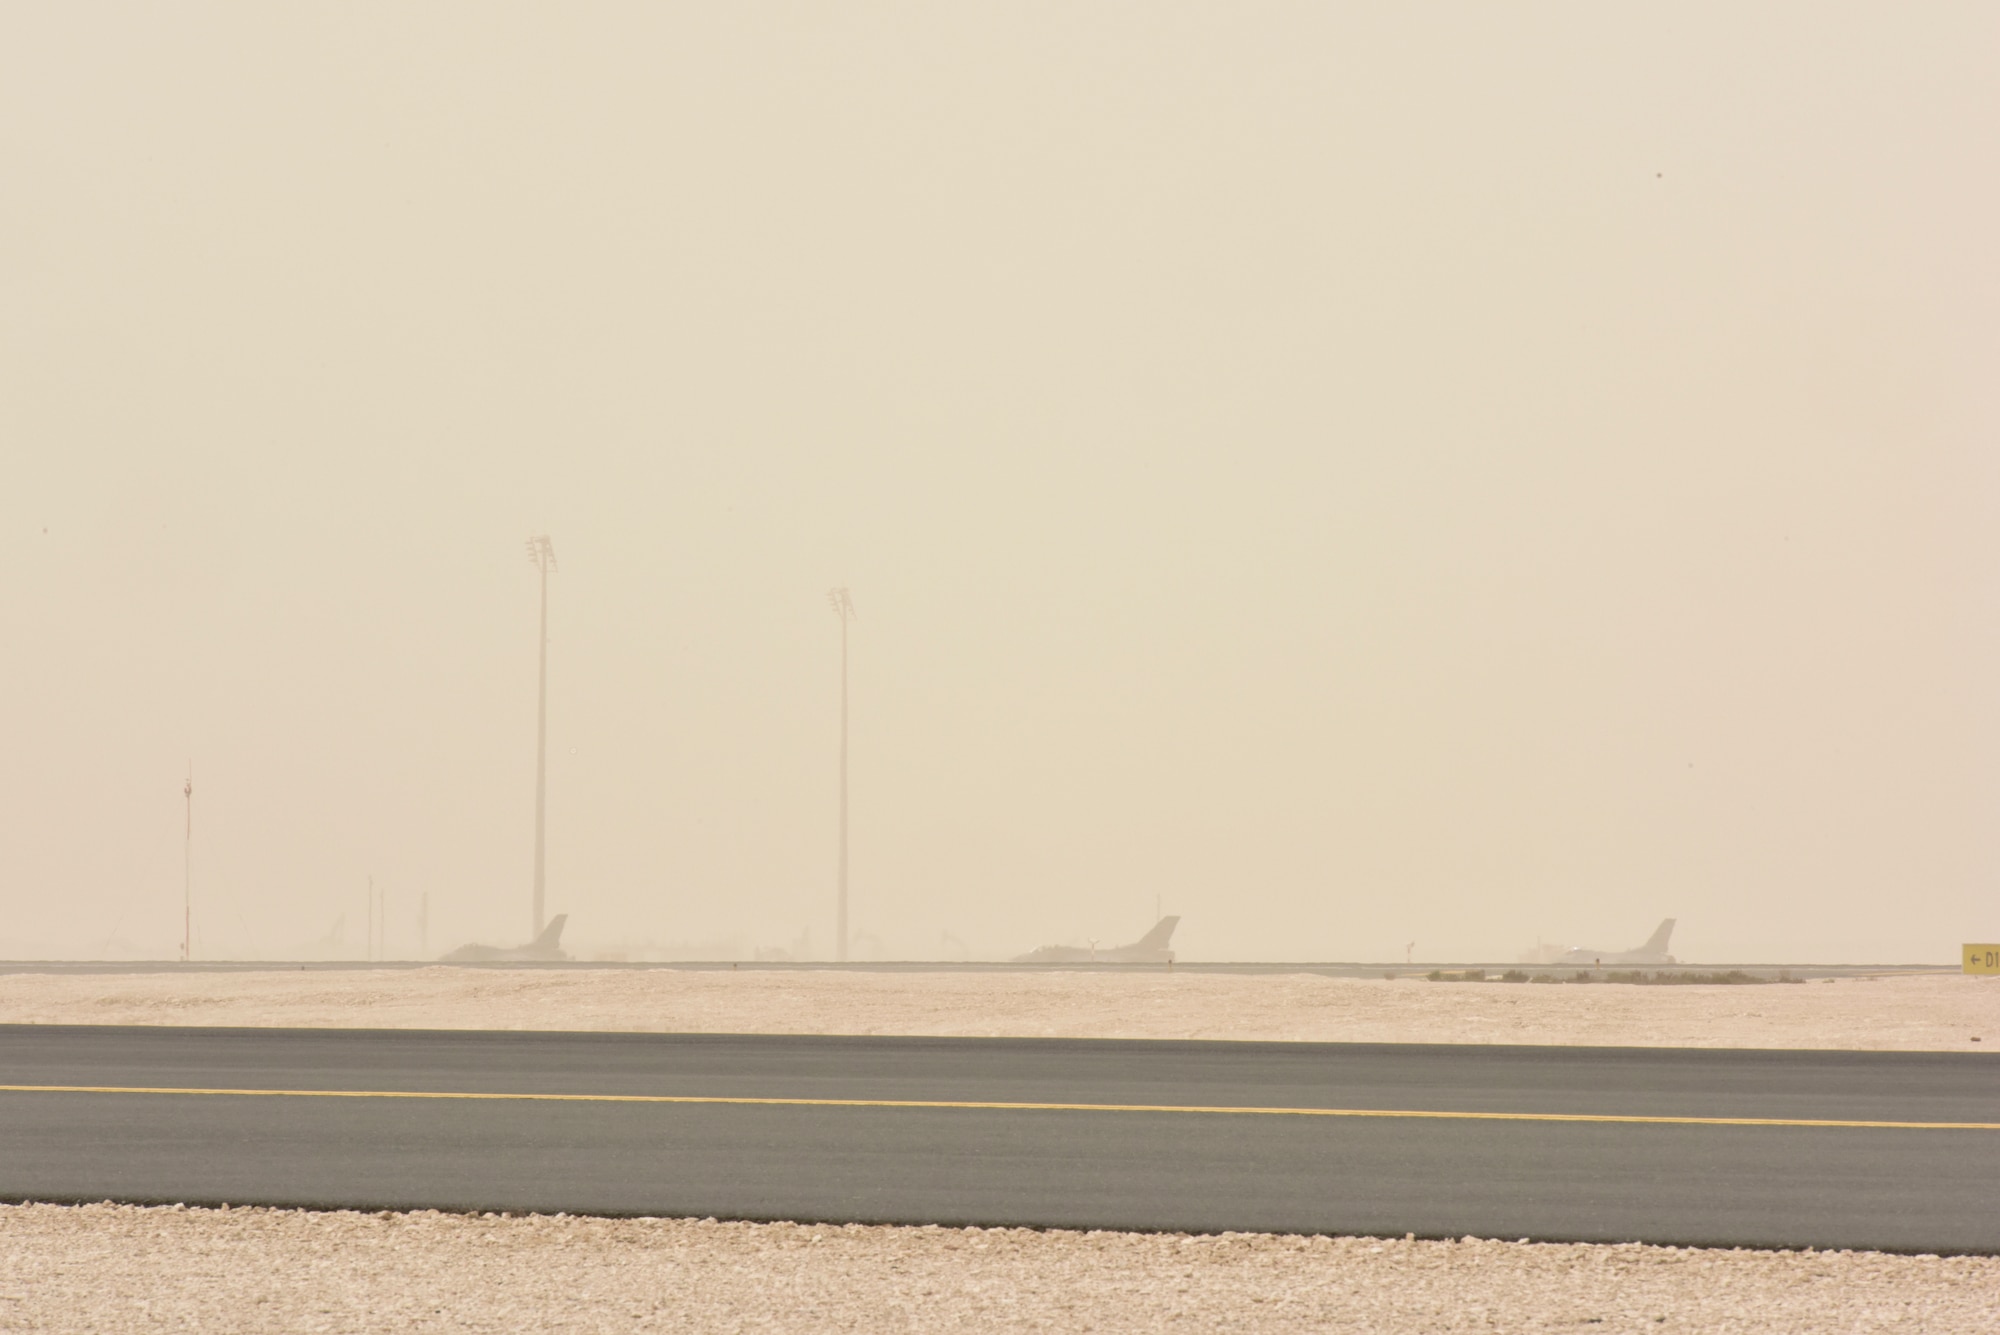 F-16 Fighting Falcon’s with the 555th Fighter Squadron, also known as the “world famous, highly-respected” Triple Nickel, takes off at Al Udeid Air Base, Qatar on Feb. 26,  2020. While deployed to AUAB, the Triple Nickel flew more than 840 sorties and nearly 5,000 hours in less than 120 days, directly supporting combat operations in Operations Spartan Shield and Inherent Resolve. (U.S. Air Force photo by Tech. Sgt. John Wilkes)